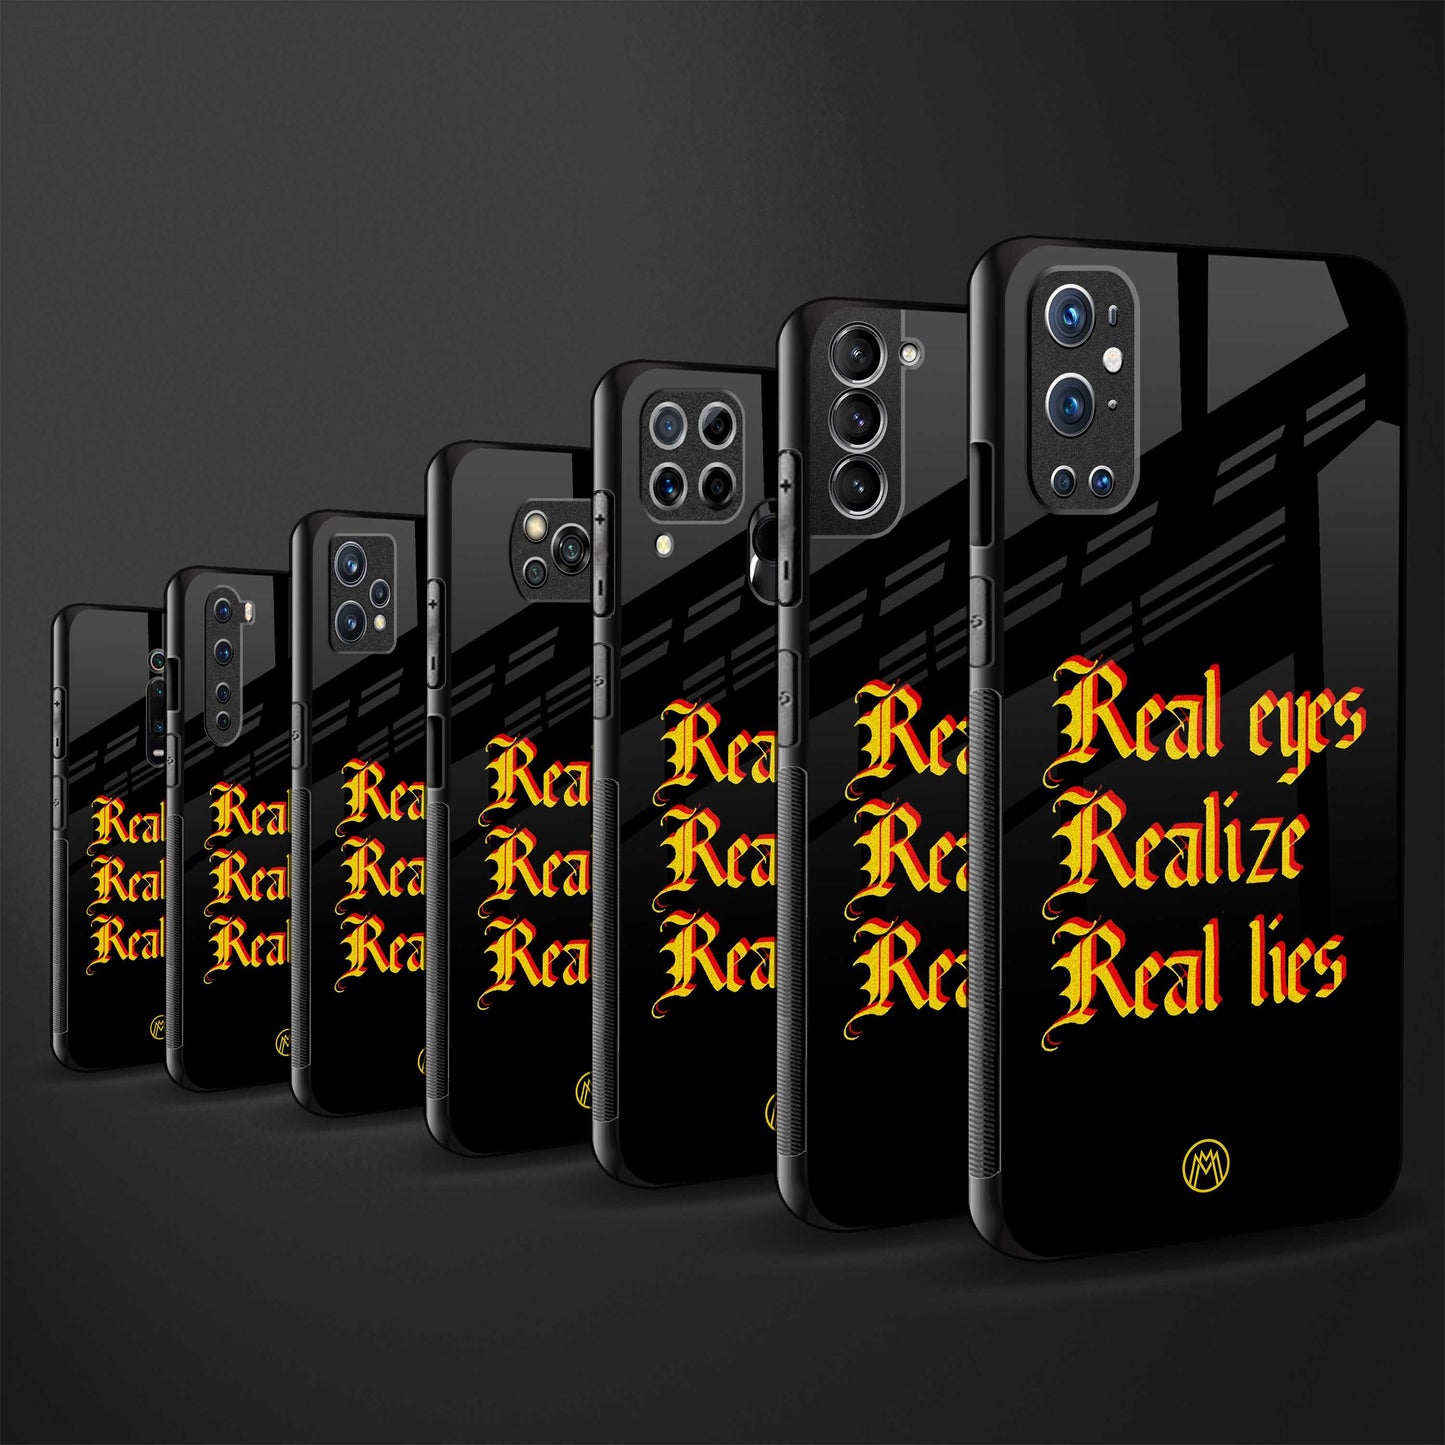 real eyes realize real lies quote glass case for redmi k20 pro image-3